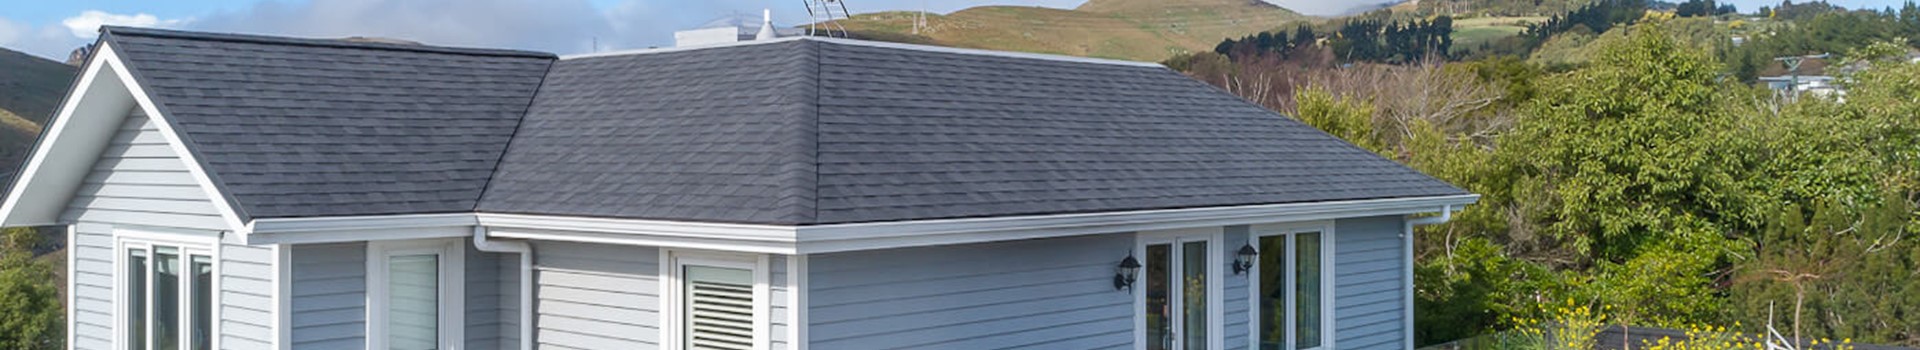 Shingle and Tile Roofing